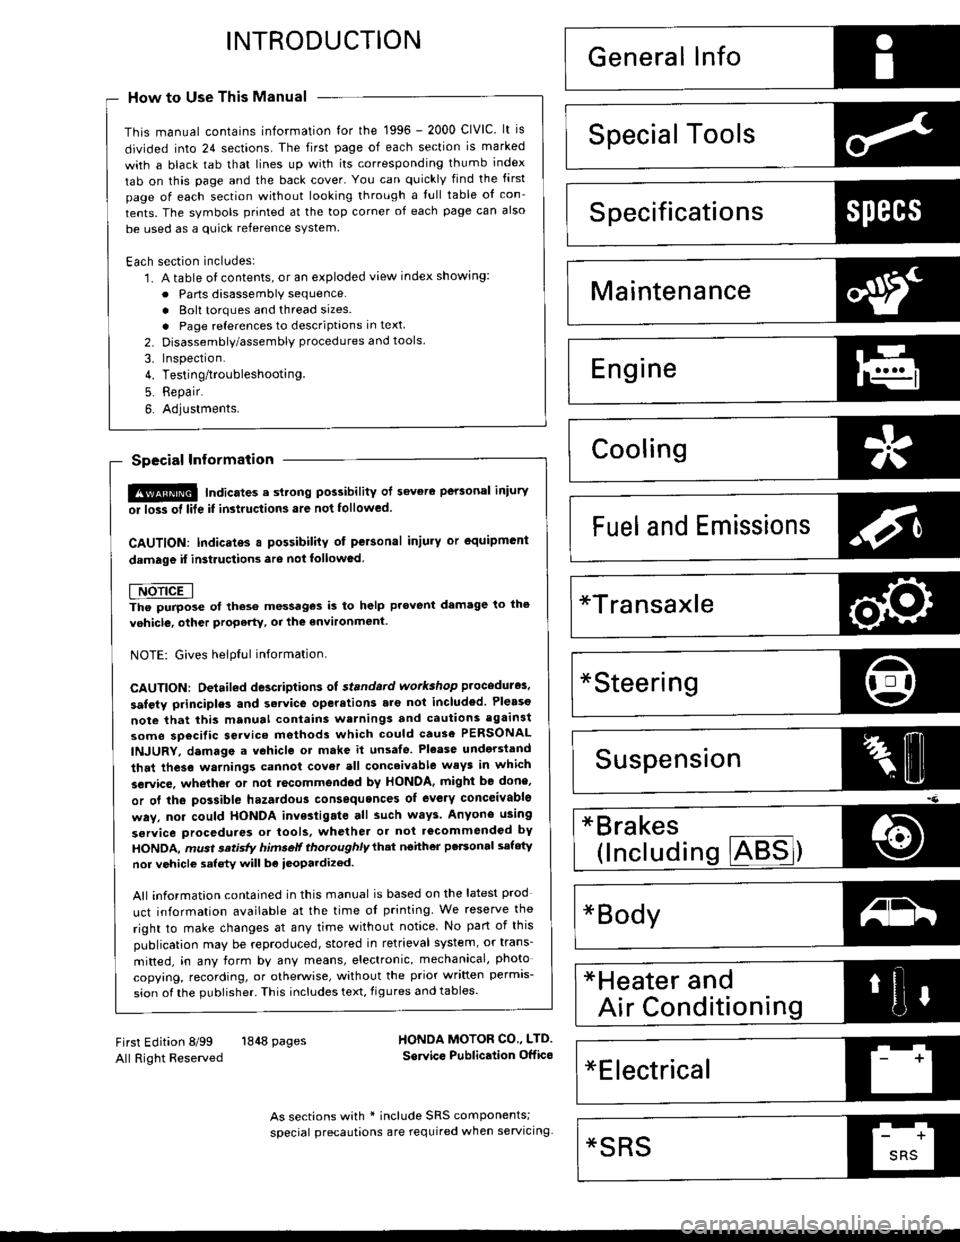 HONDA CIVIC 2000 6.G Workshop Manual INTRODUCTION
How to Use This Manual
This manual contains information for the 1996 - 2000 ClVlC. lt is
divided into 24 sections. The first page of each section is marked
with a black tab that lines up 